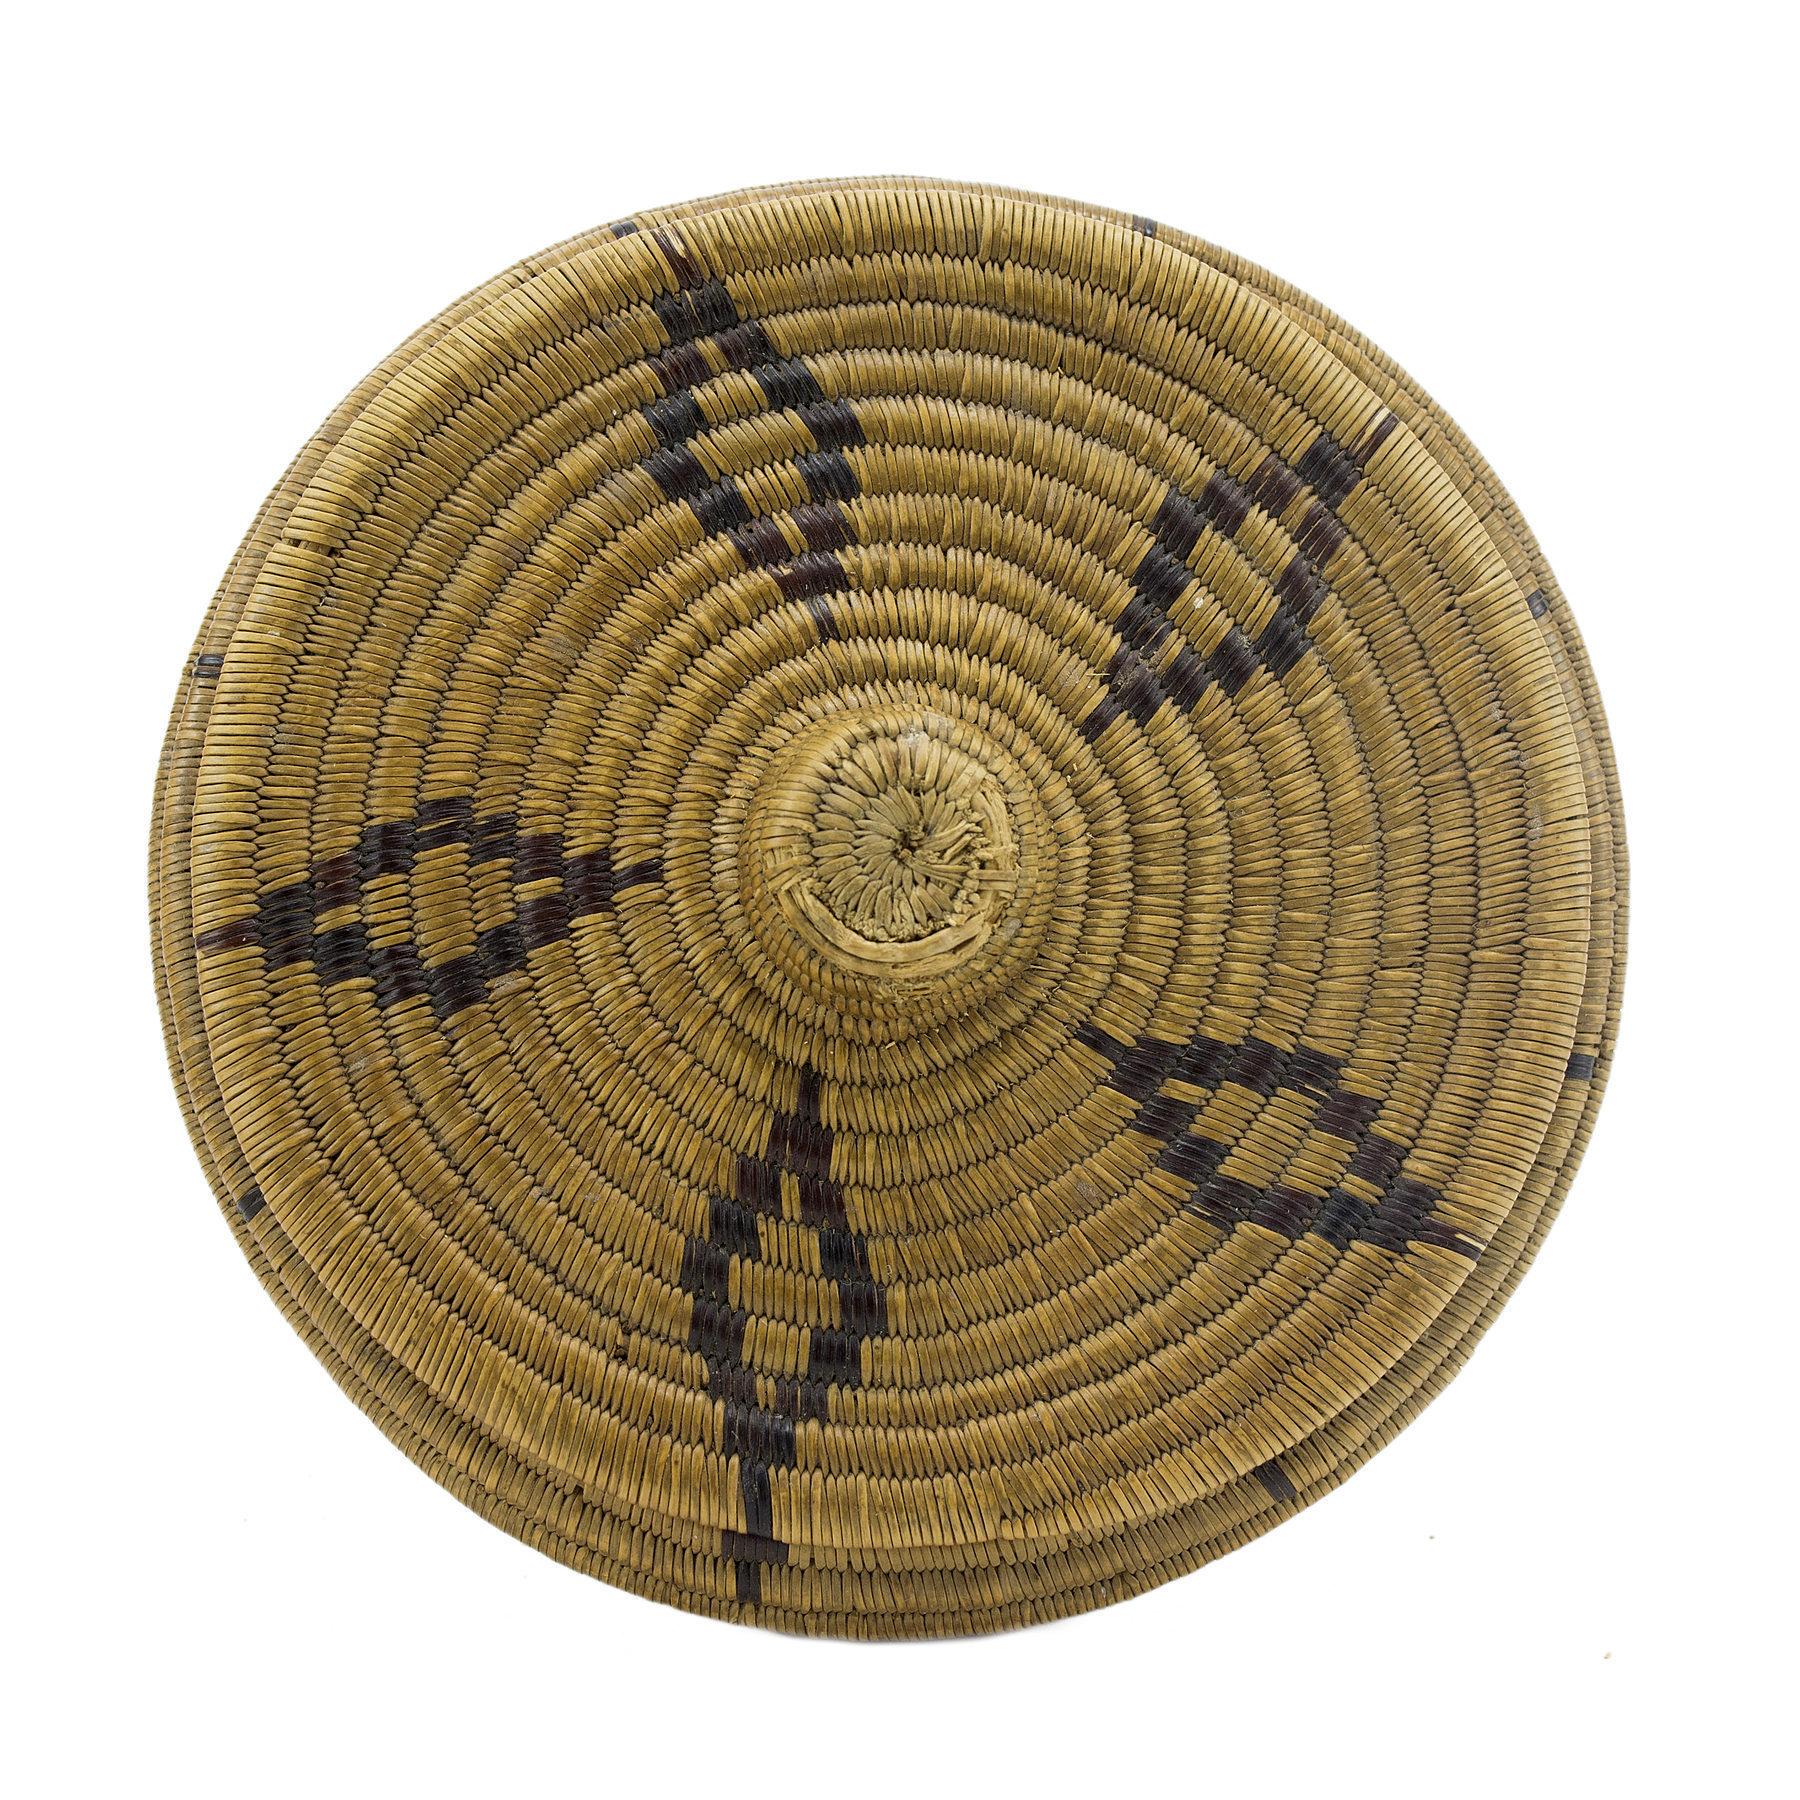 Very finely woven Panamint lidded basket having four eagles and diamond motif on lid. 4